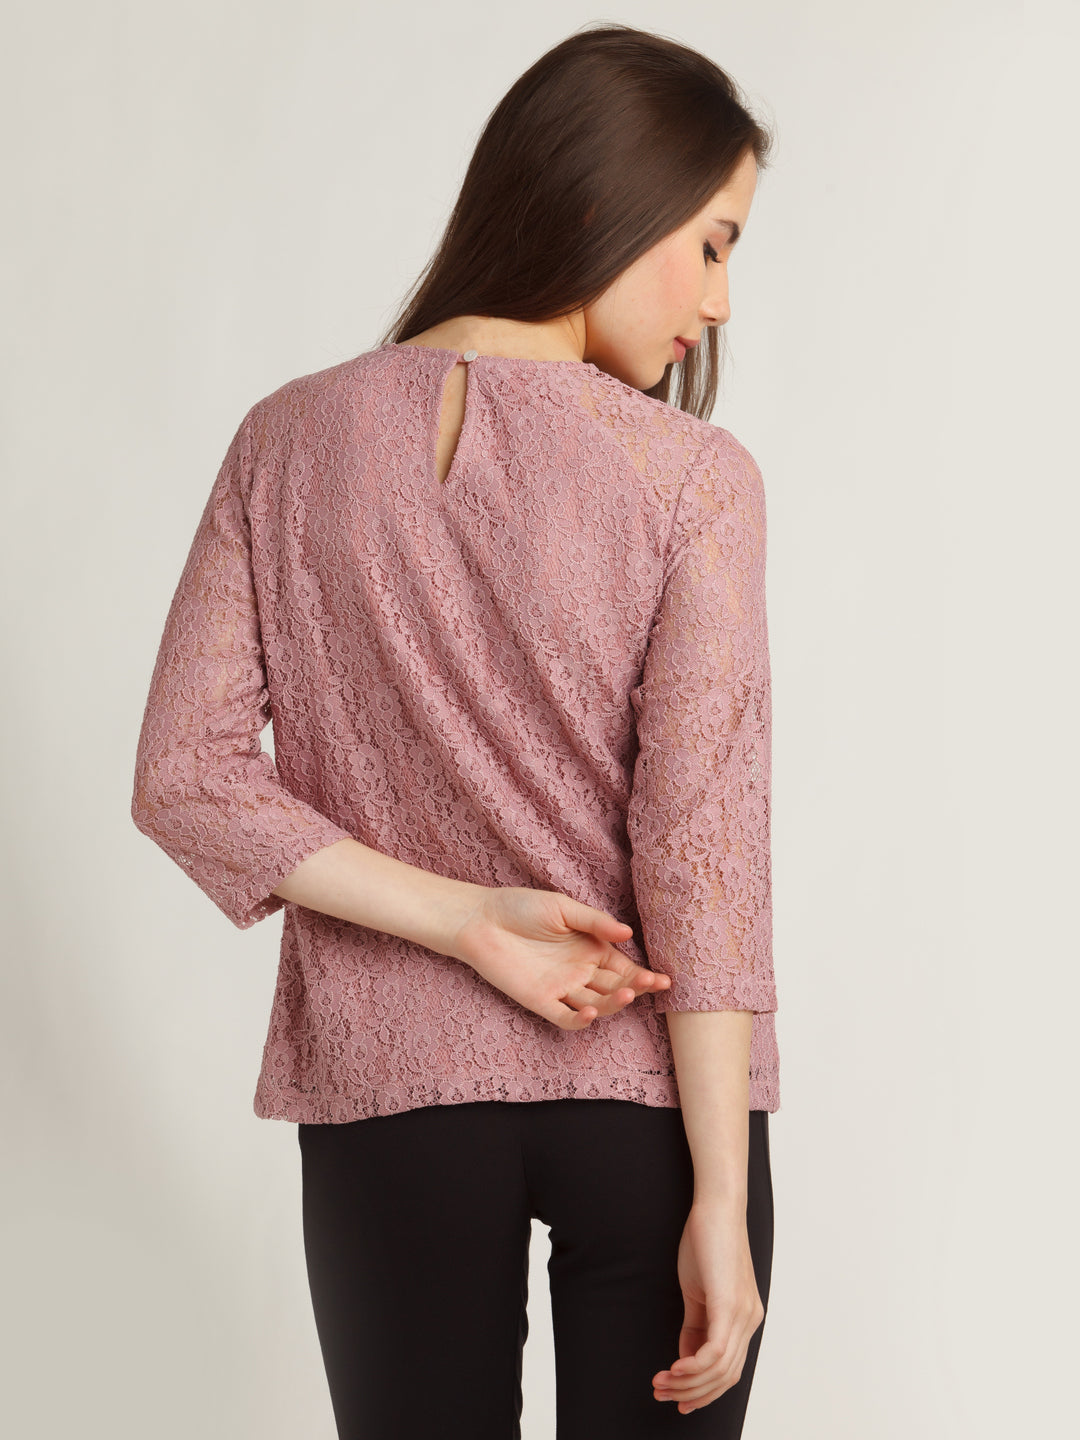 Pink Lace Top For Women